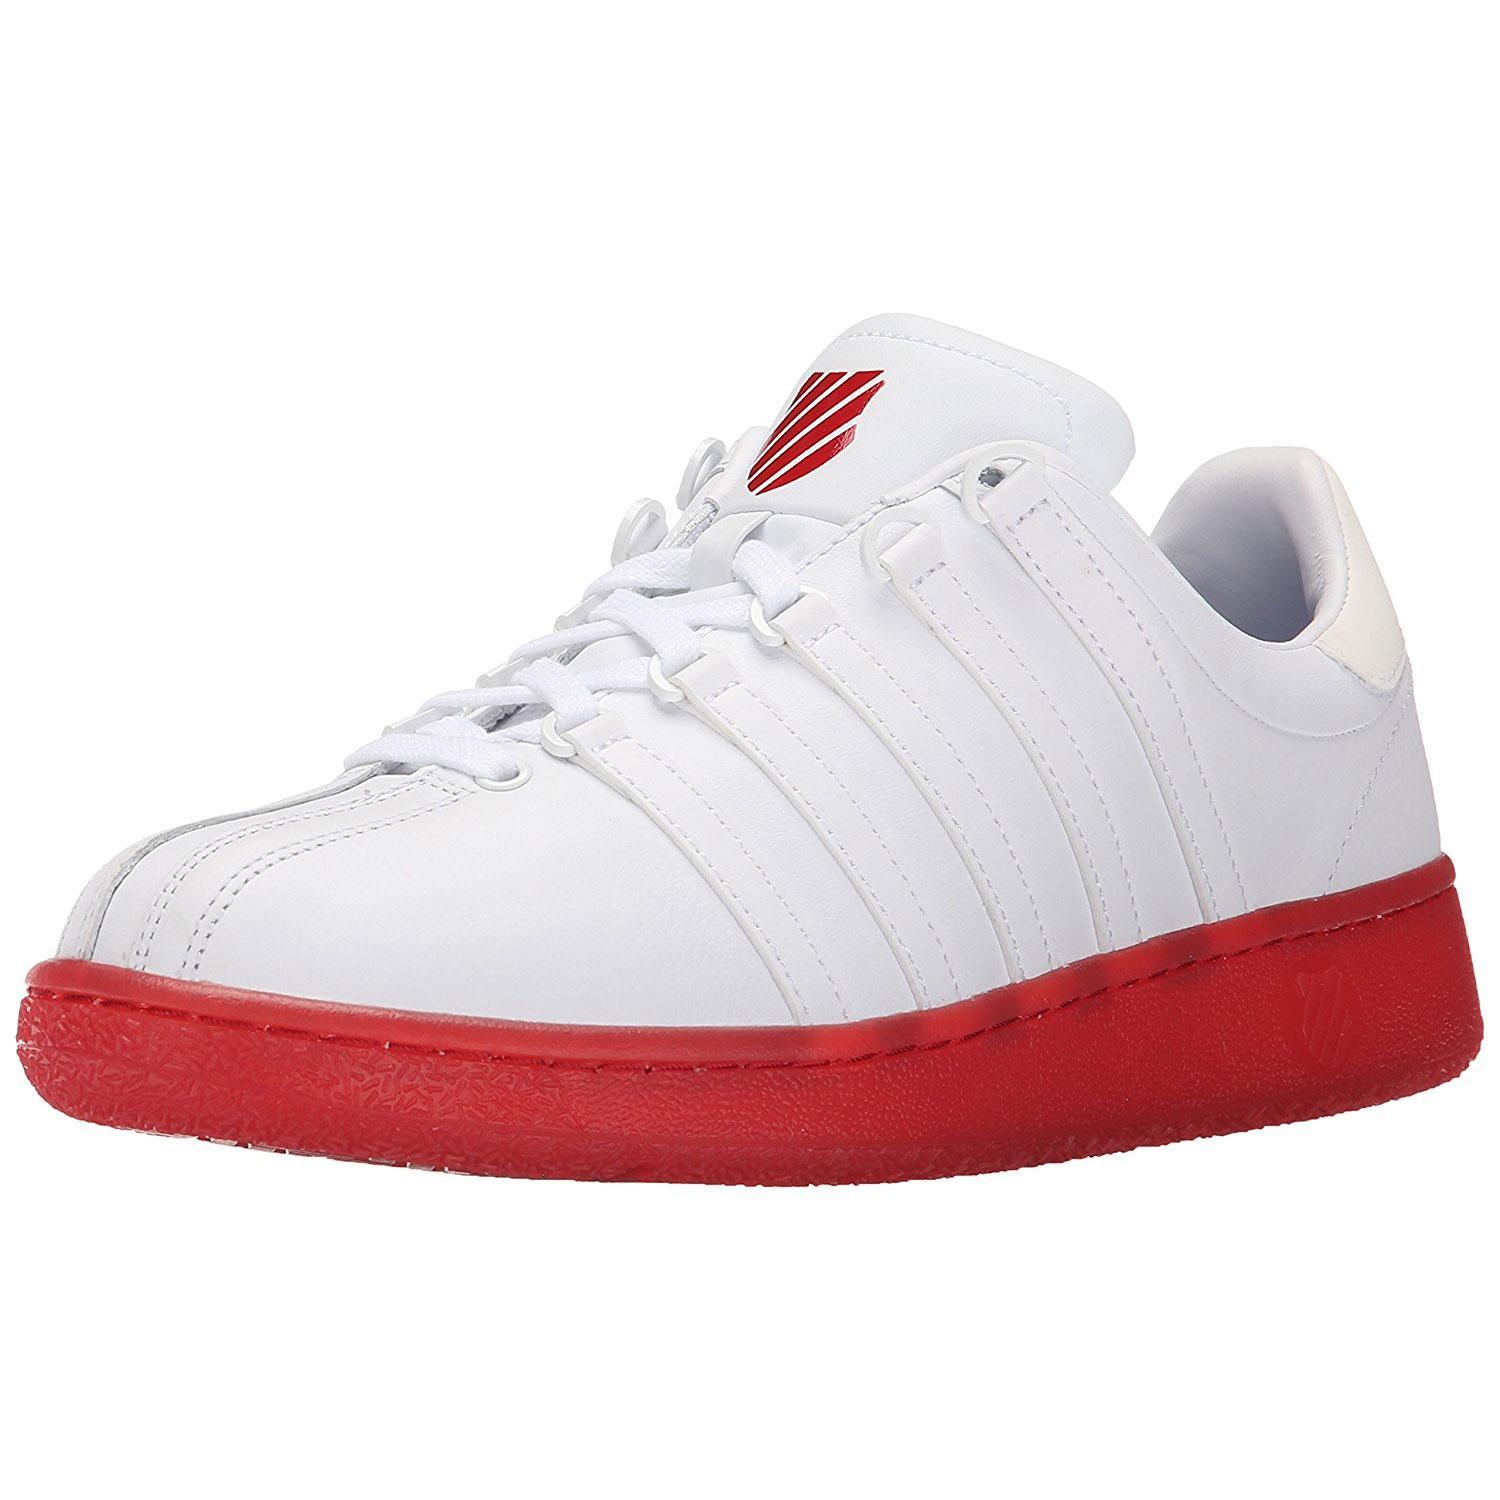 White with a Red K Logo - K-Swiss Men's Classic VN Reflective Sneakers - White/Ribbon Red